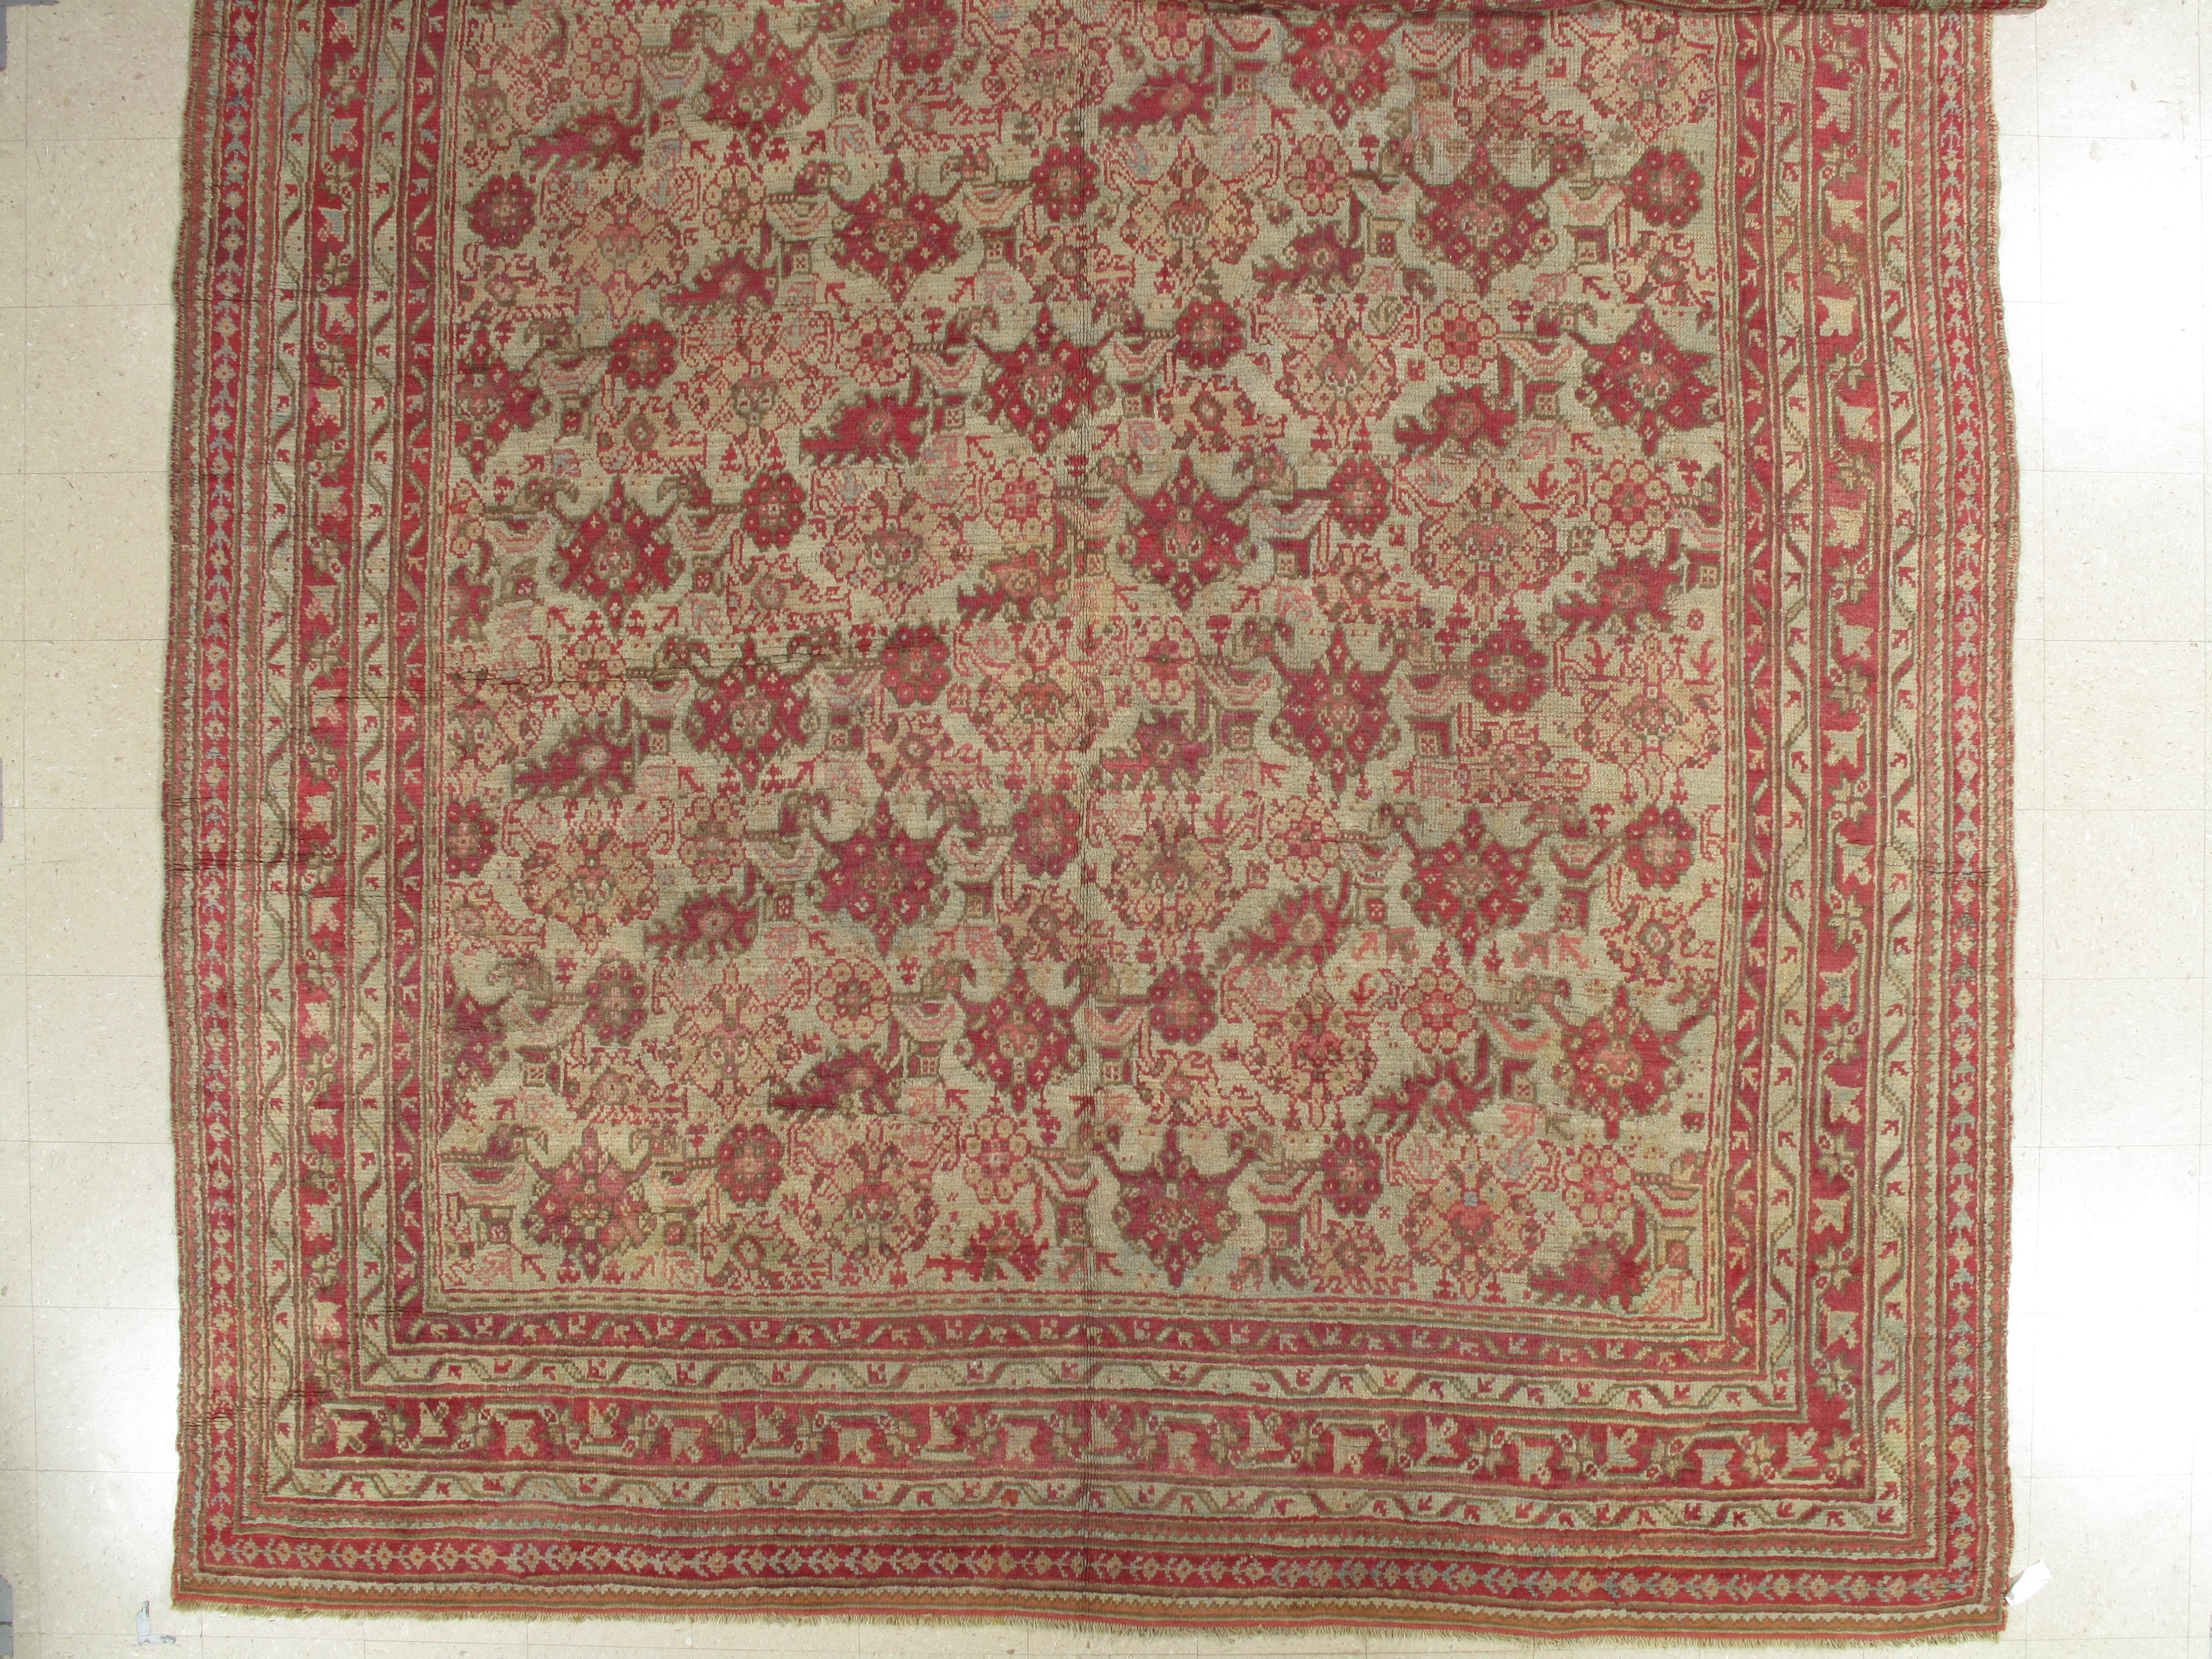 Hand-Knotted Antique Oushak Carpet, Handmade Oriental Rug, Pale Light Blue, Coral, Raspberry For Sale